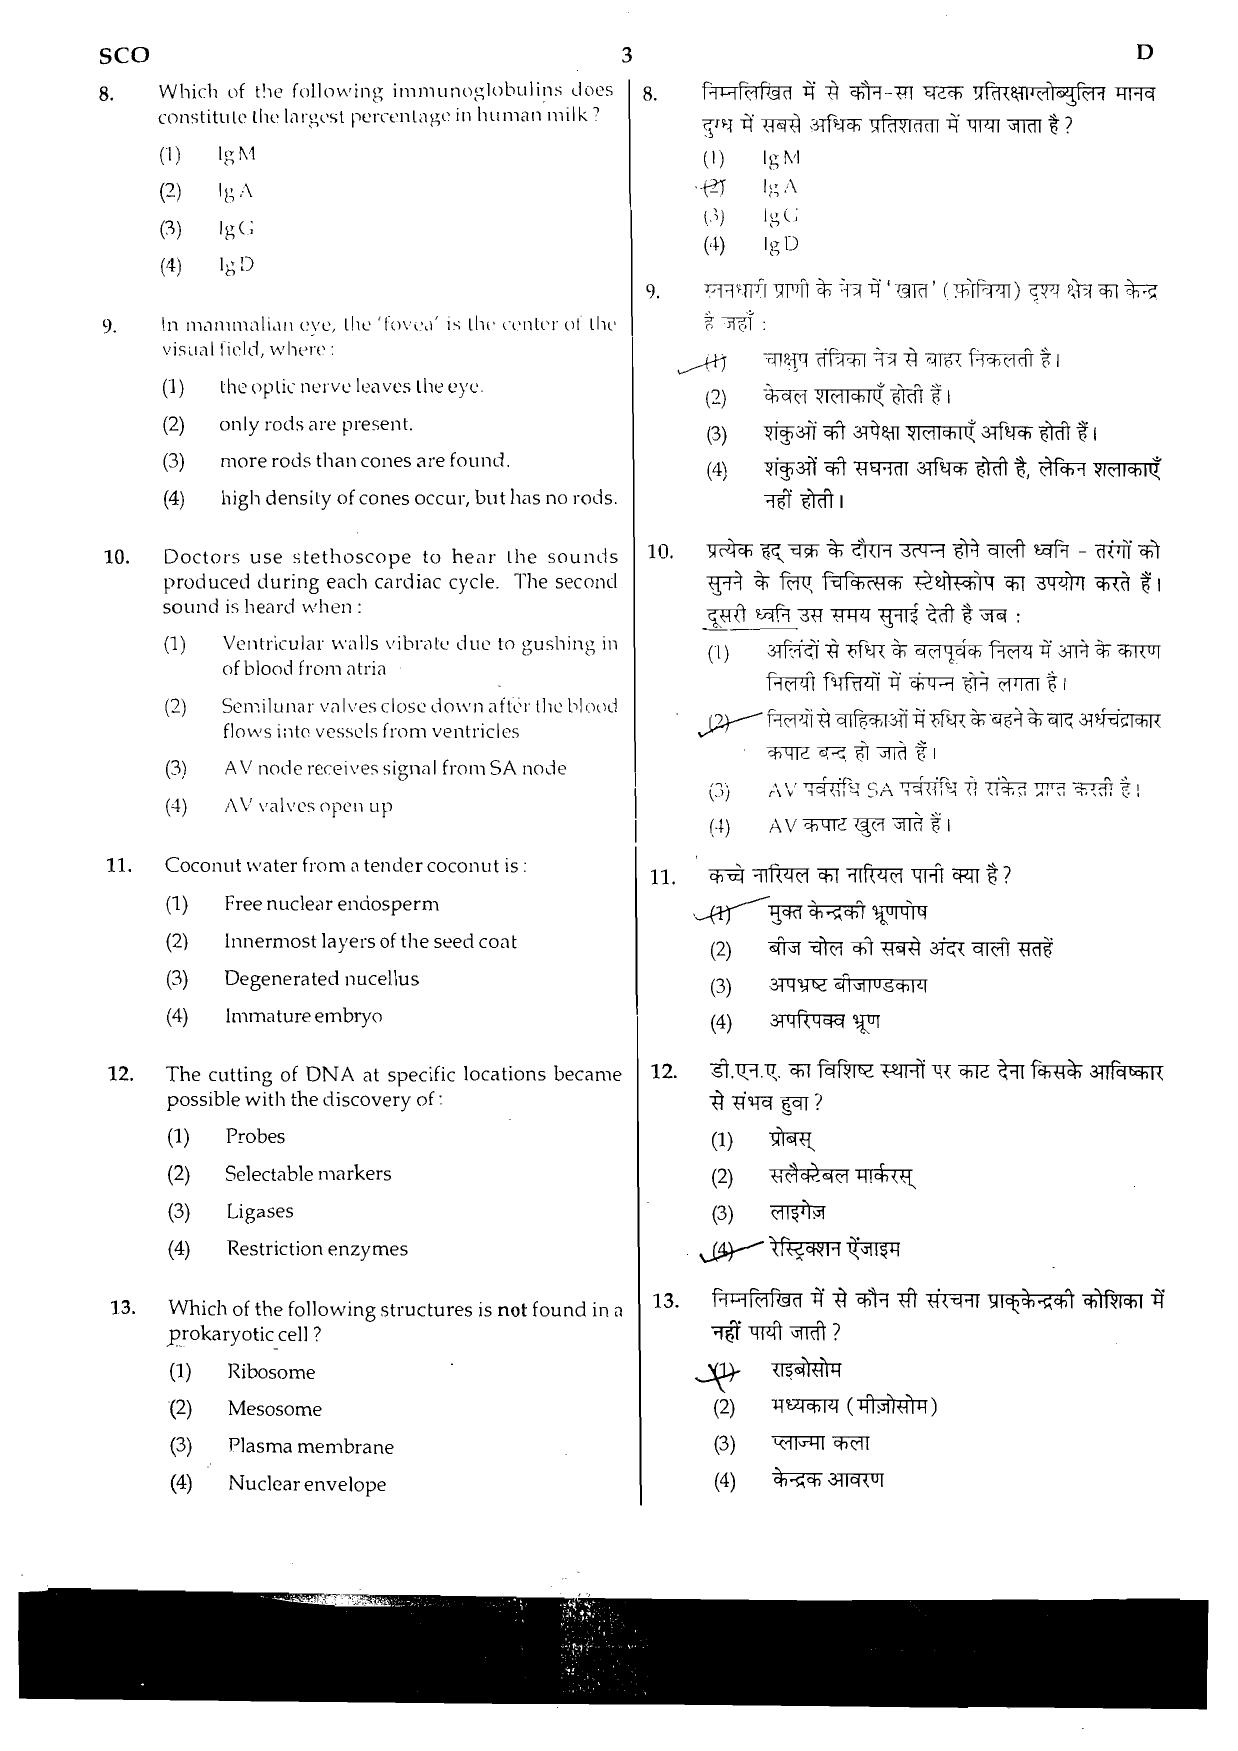 NEET Code D 2015 Question Paper - Page 3